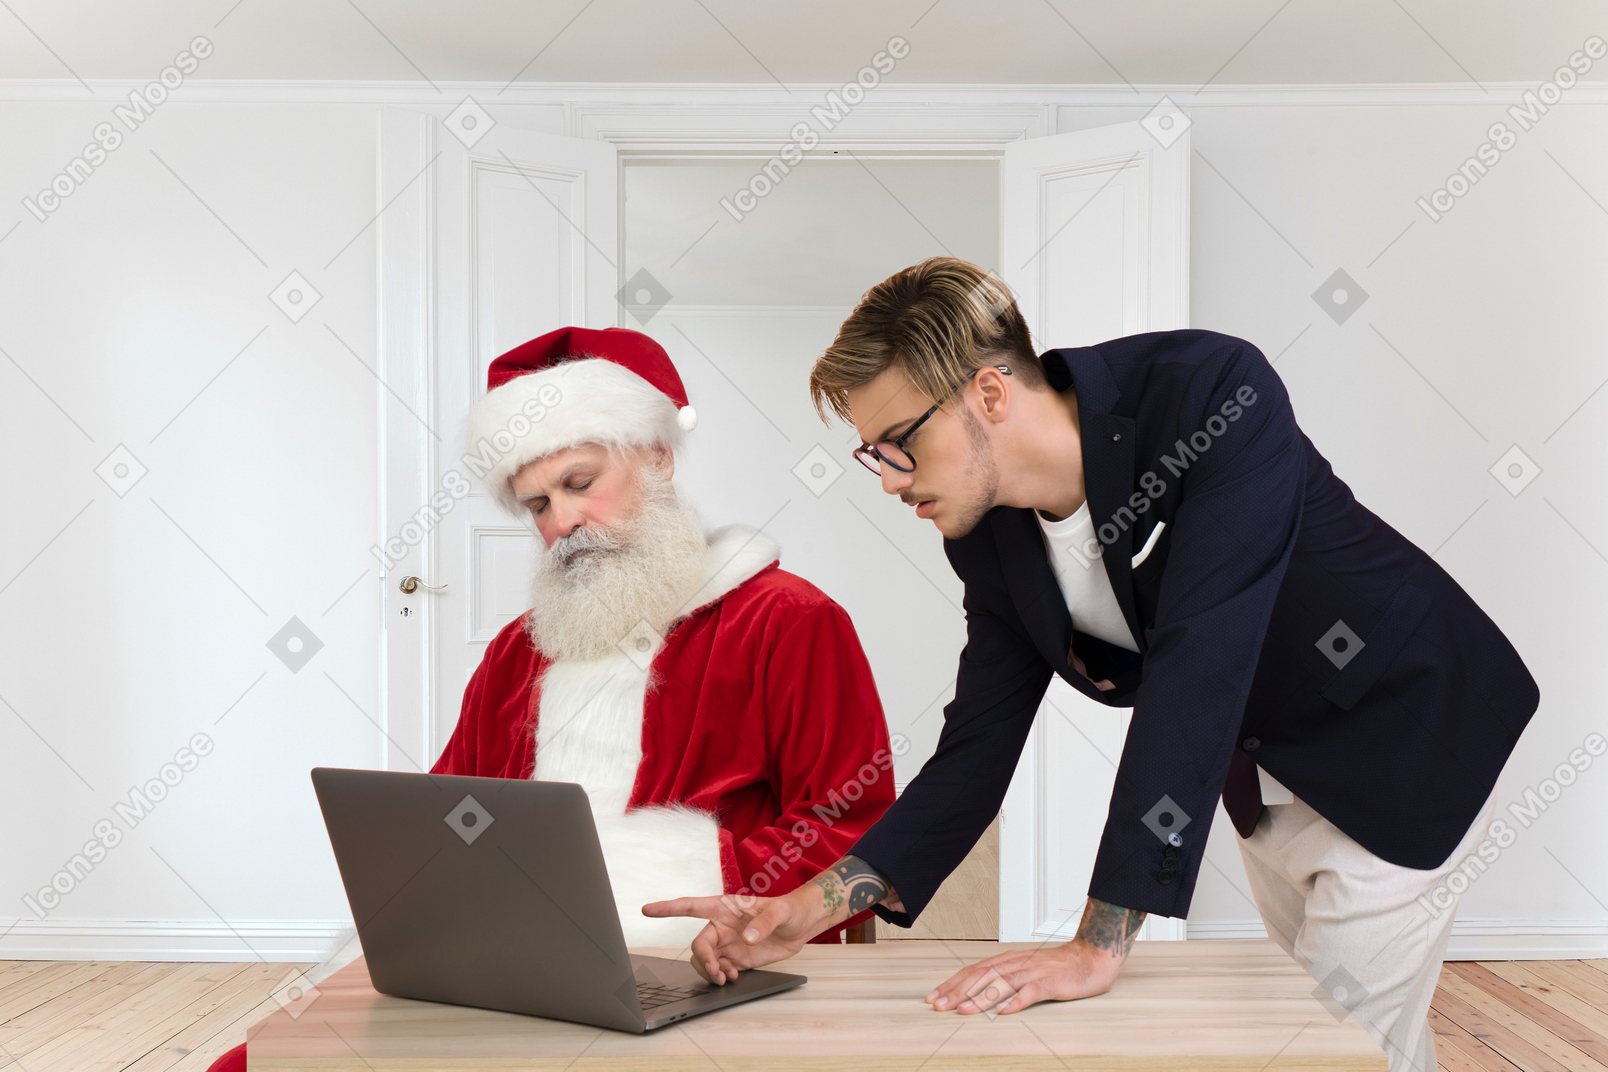 Santa's snoozing while a young man's checking some information on a computer